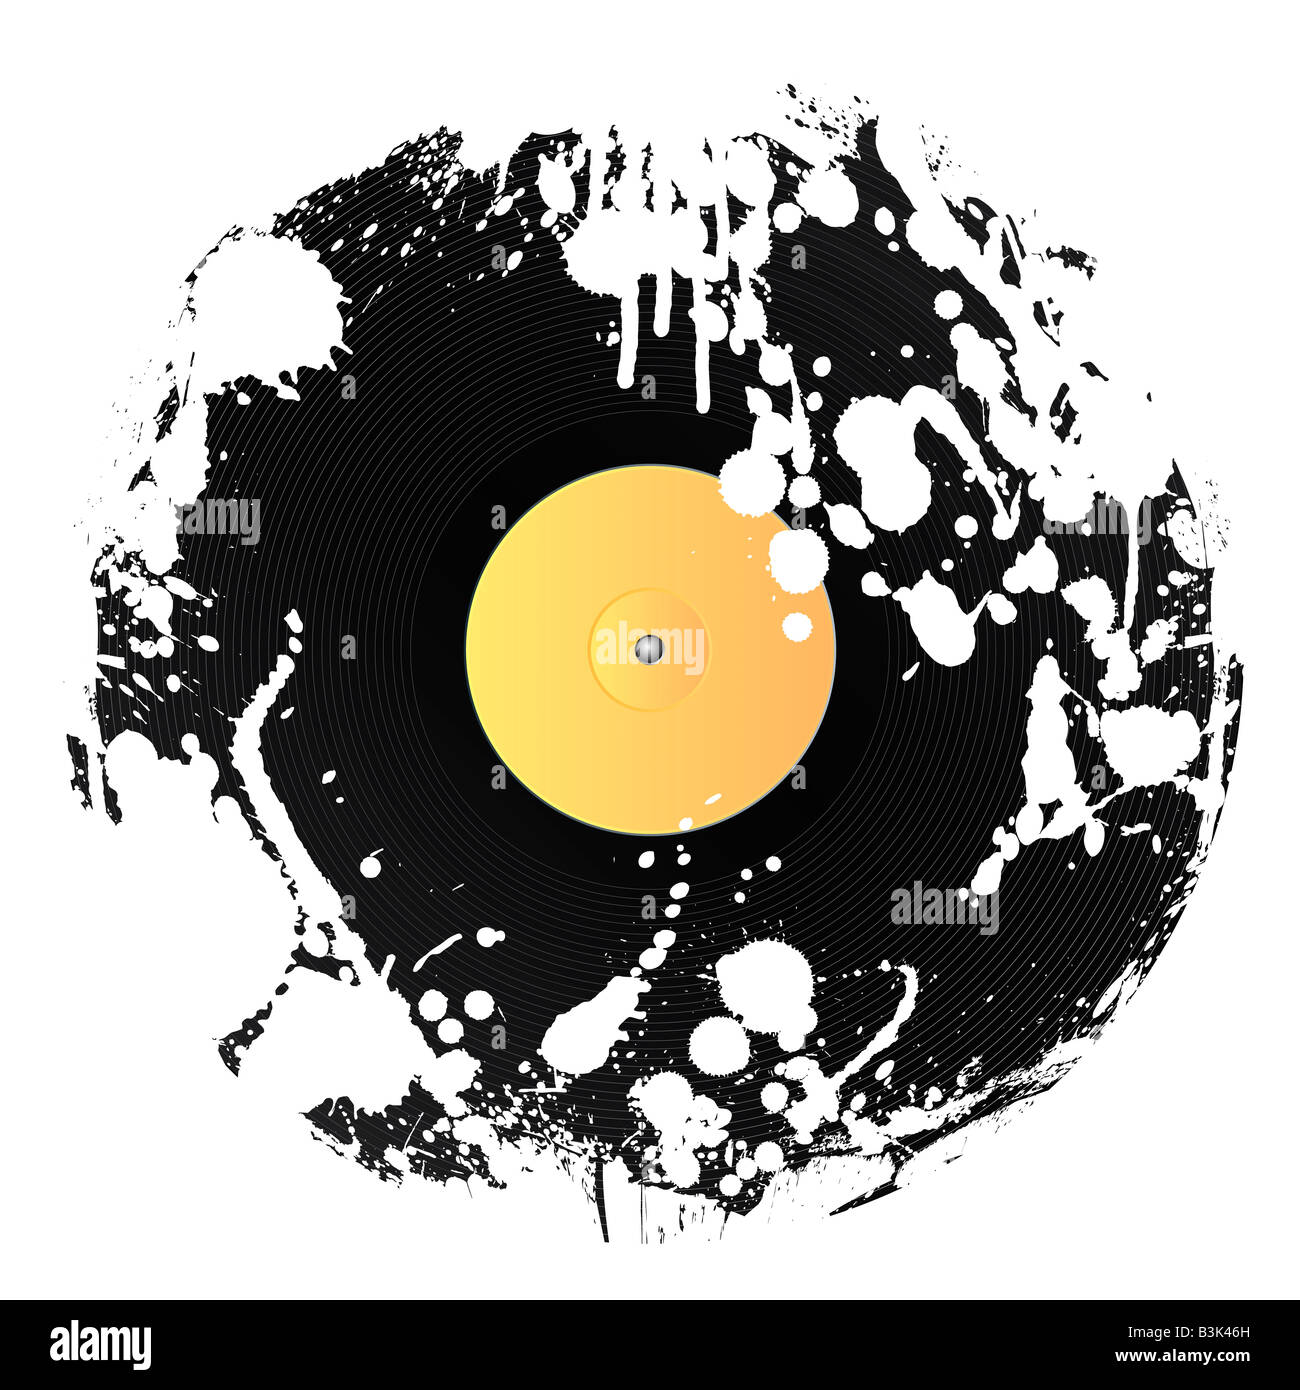 Vector illustration of a vinyl disc covered in white ink splatters Grunge style Stock Photo